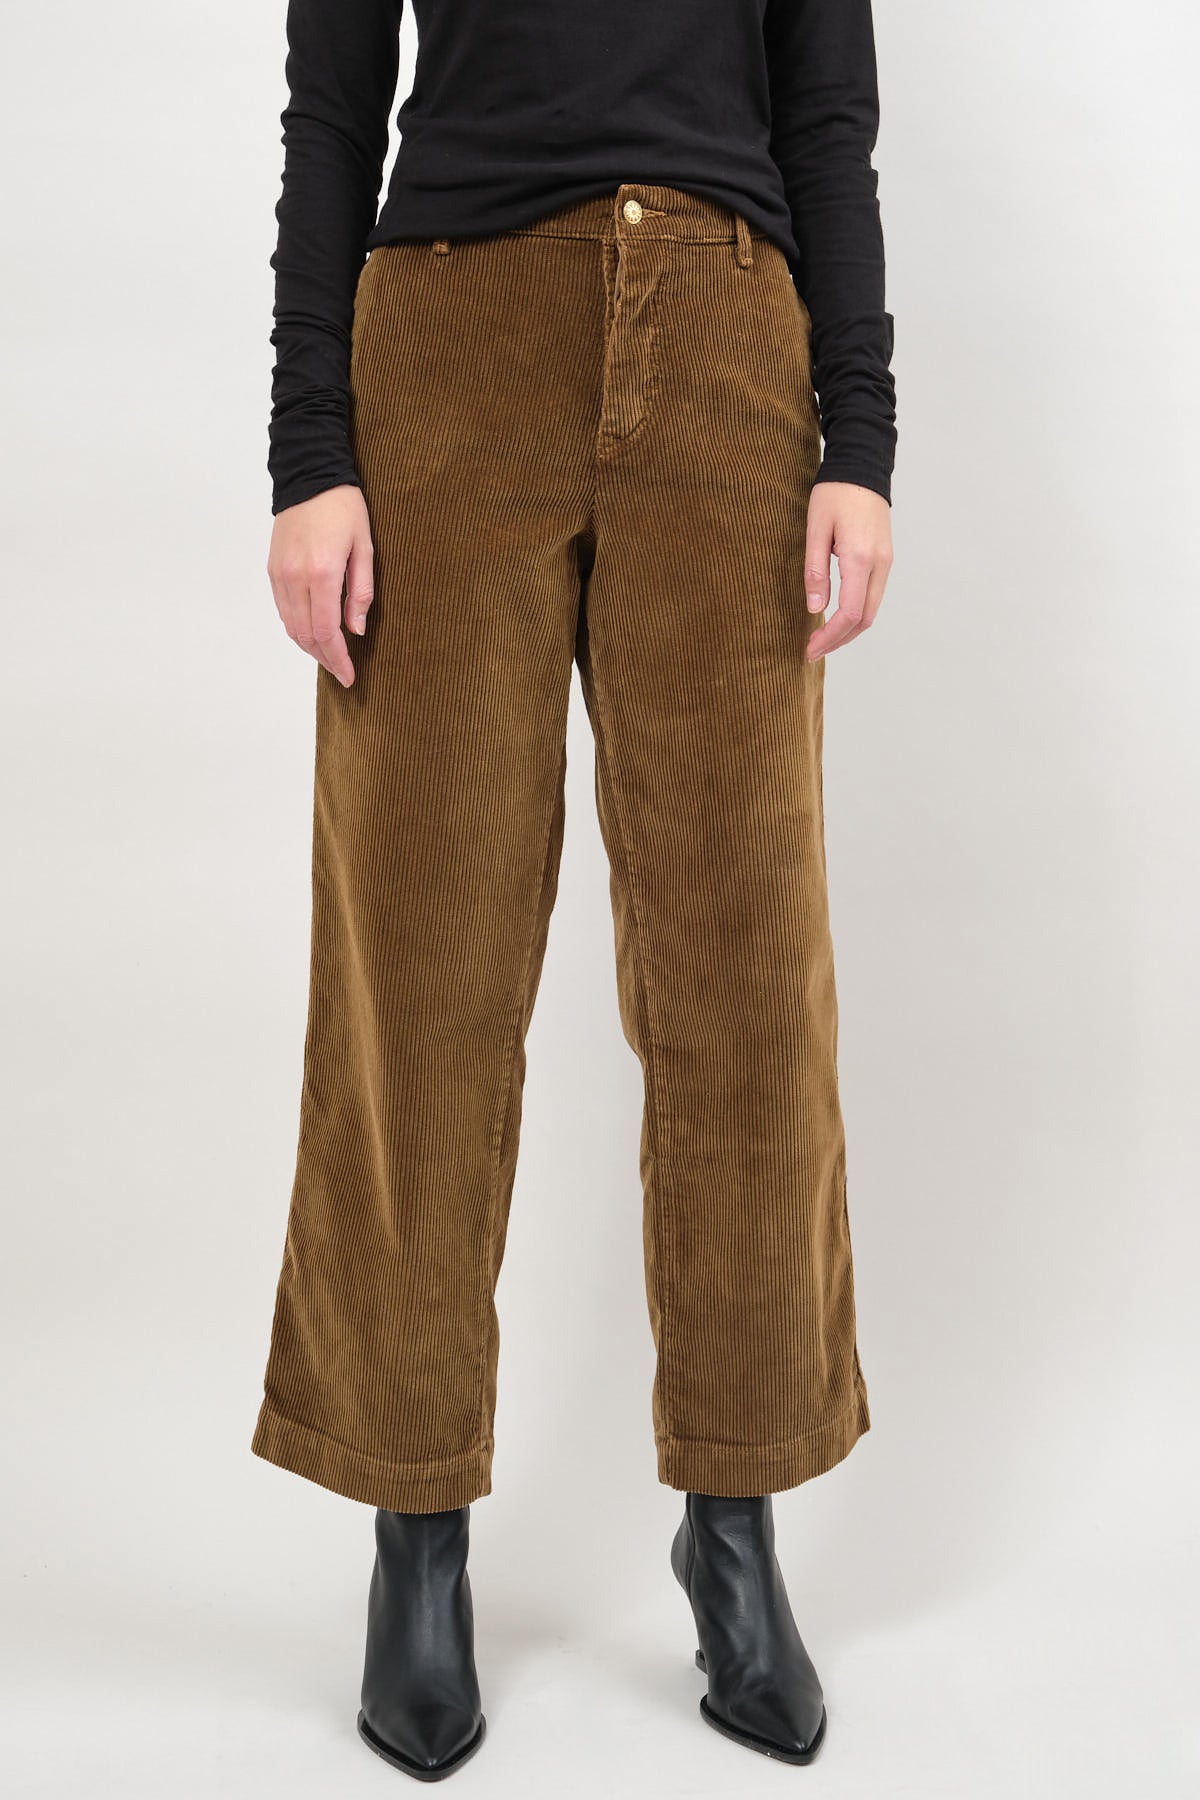 Front of Chino in Camel Corduroy